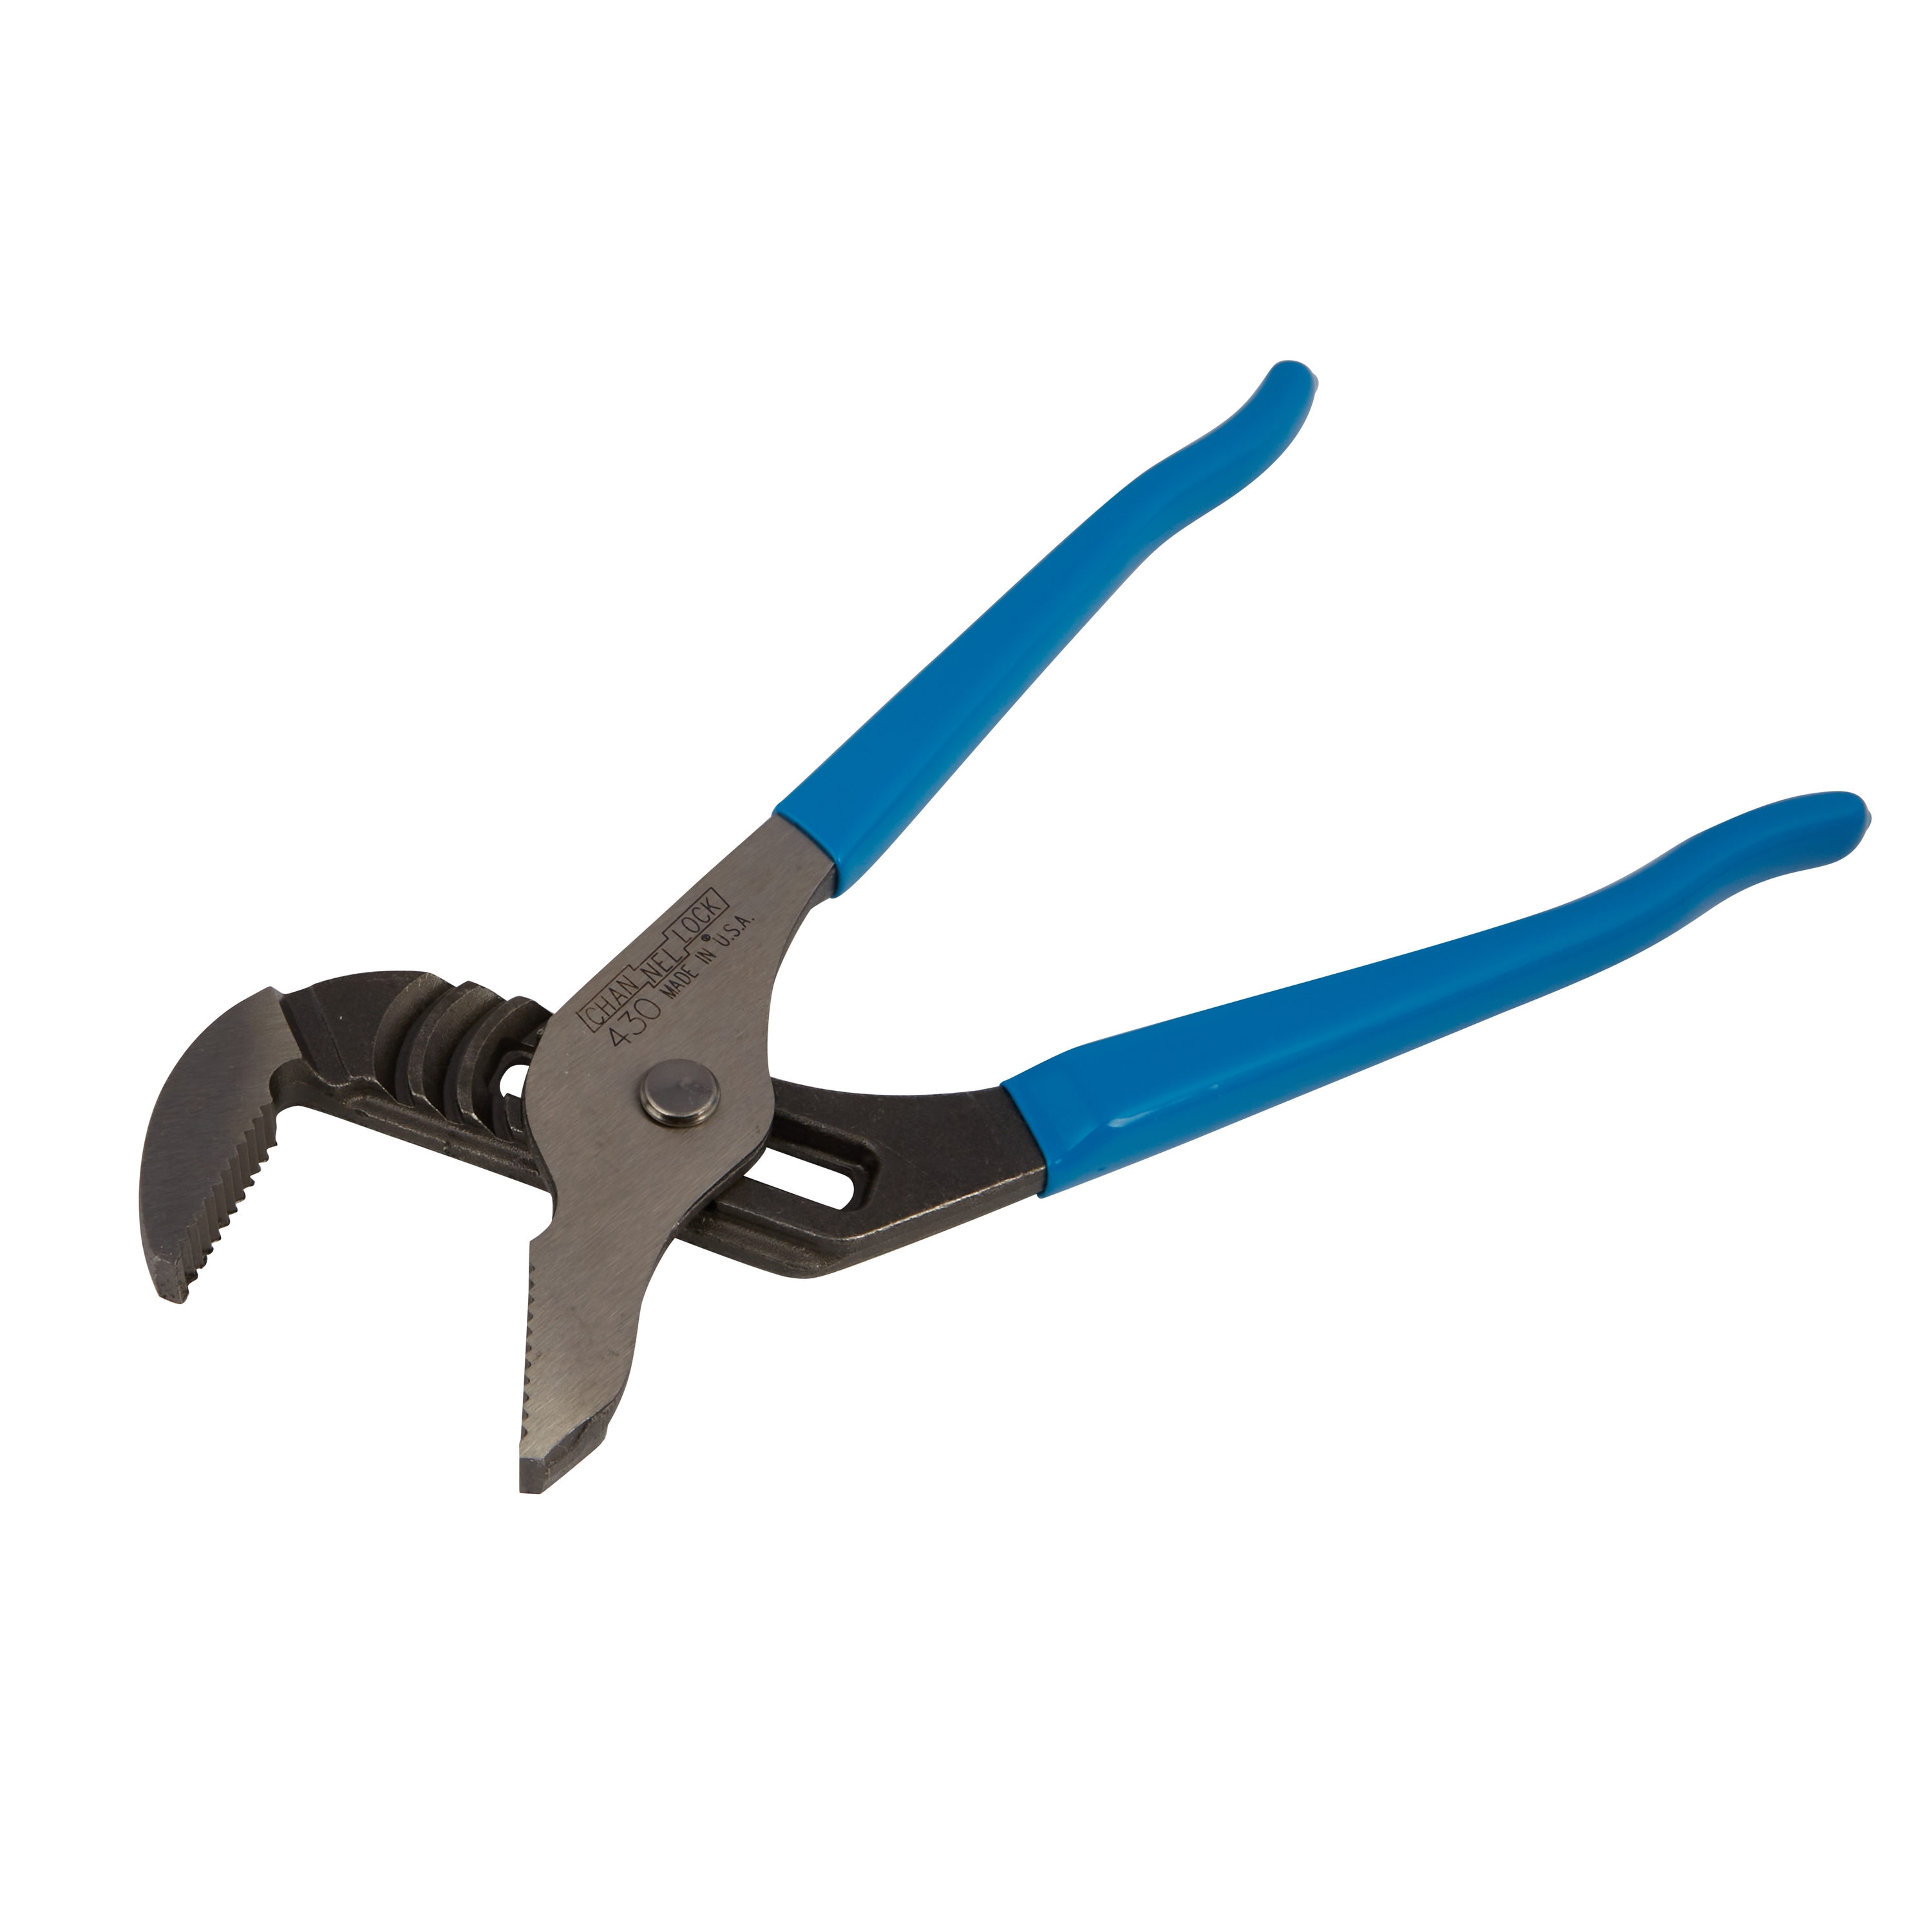 Channellock 10 (Non-Marring) Smooth Jaw Pump Pliers - Greschlers